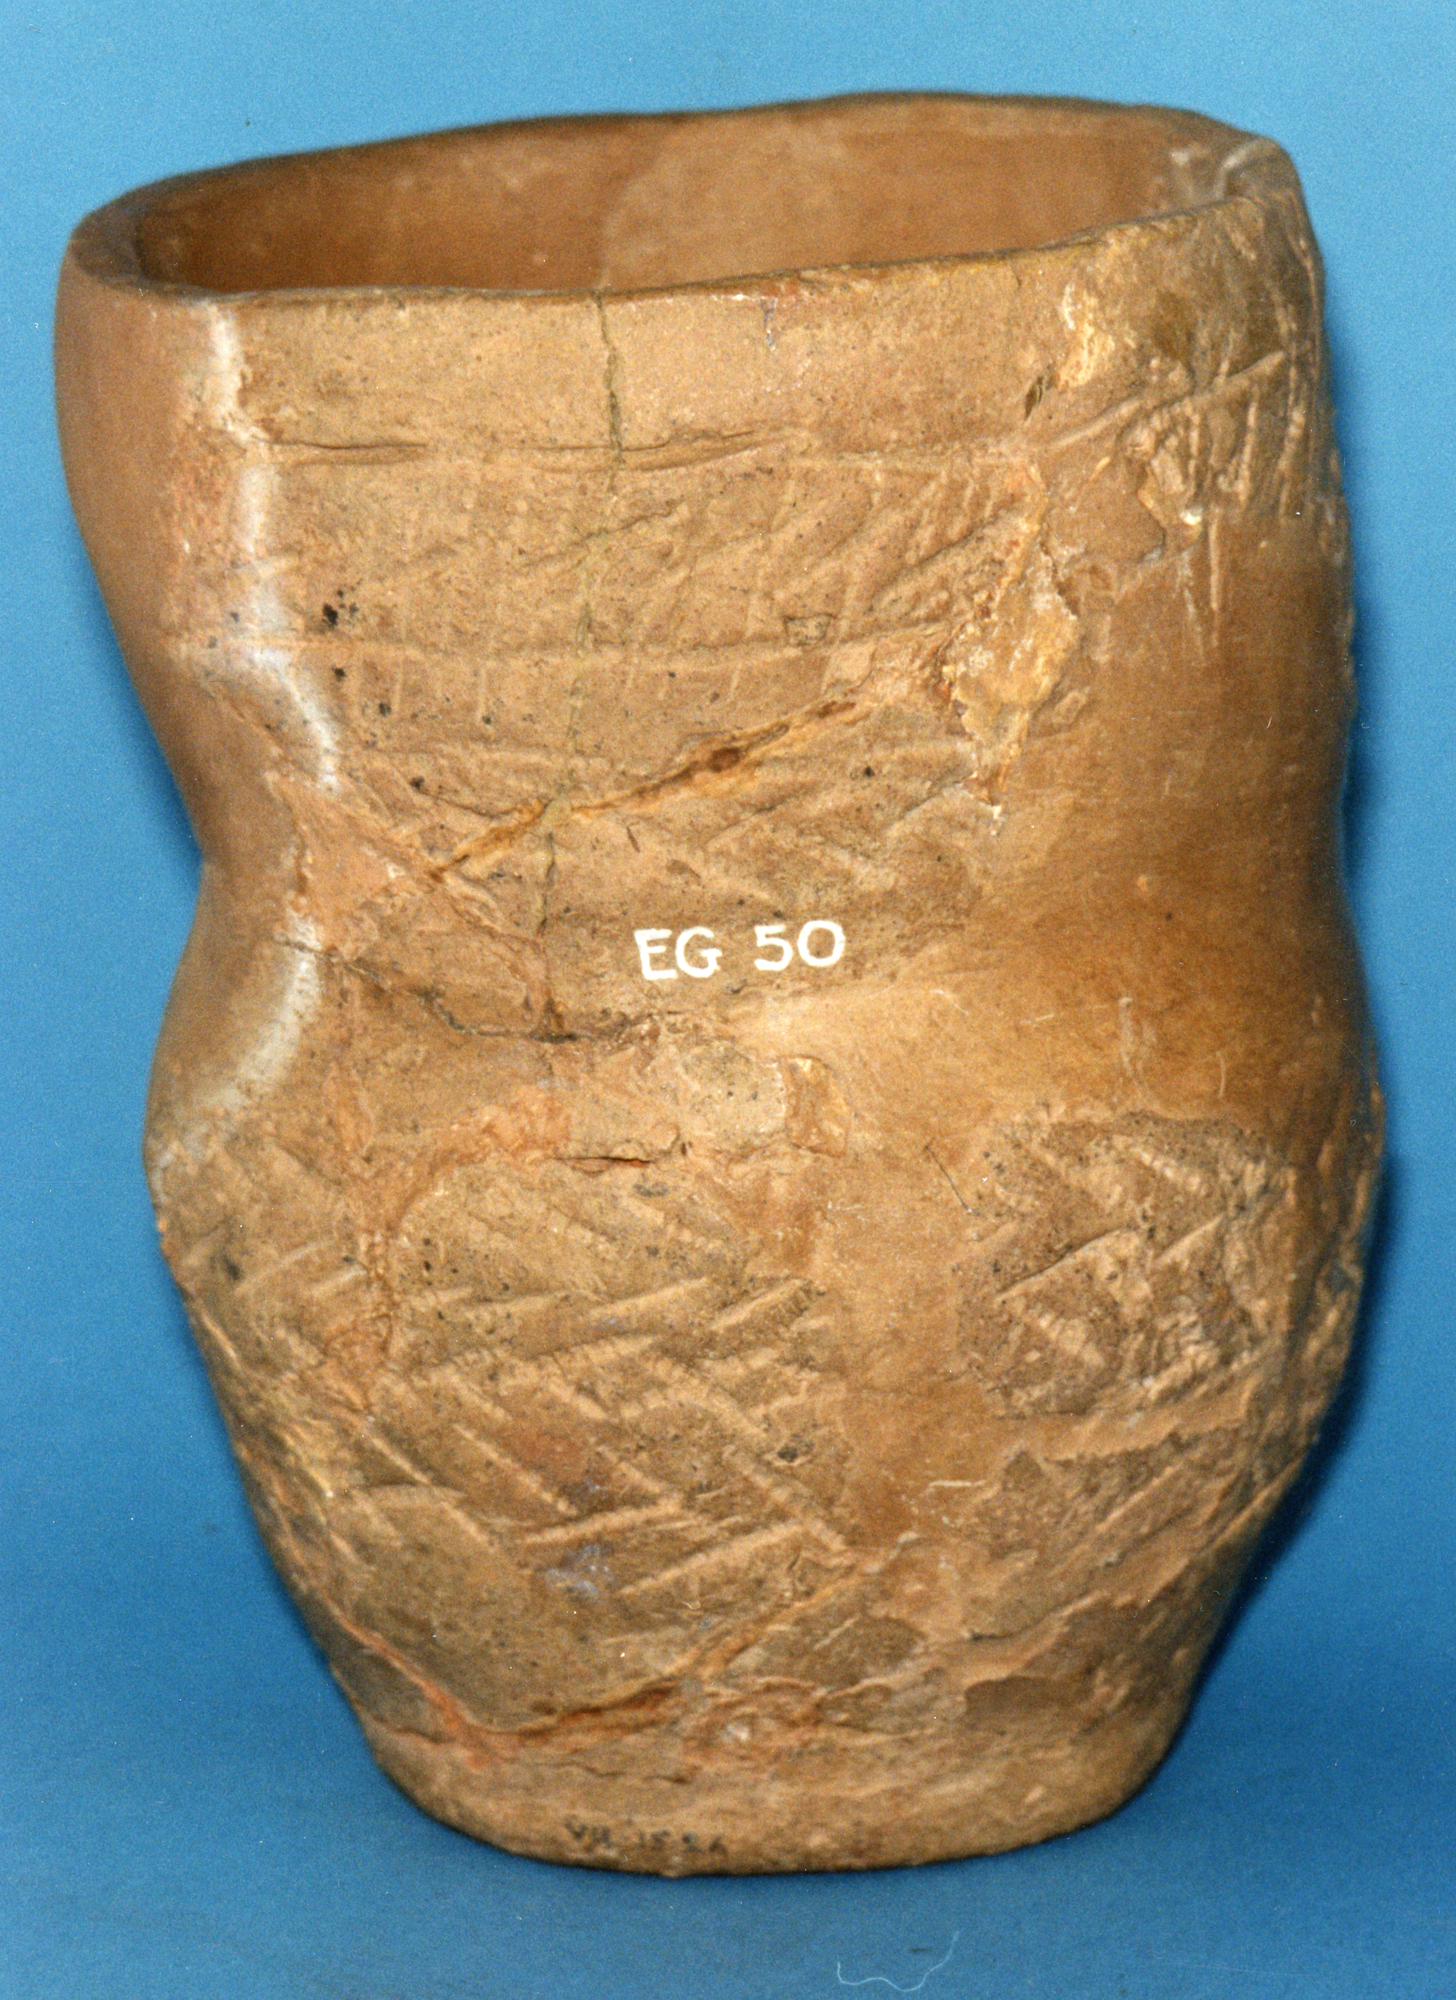 Image of Sherd of Beaker pottery from Seton, East Lothian © National Museums Scotland